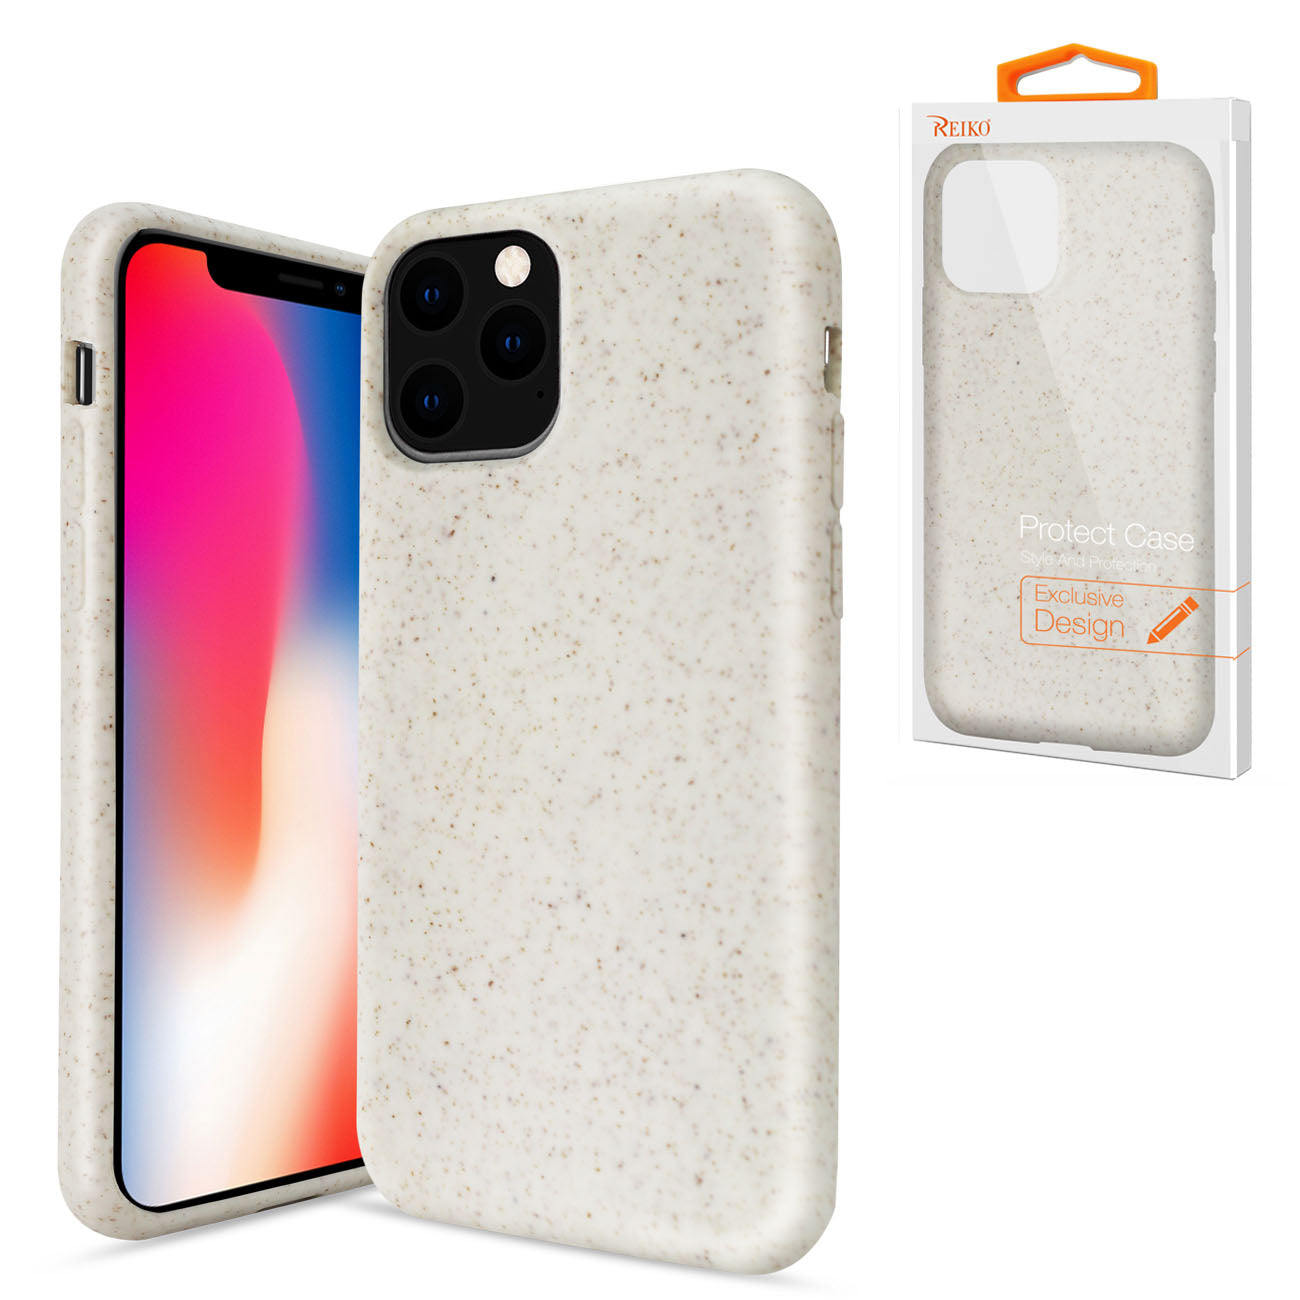 APPLE IPHONE 11 PRO MAX Wheat Bran Material Silicone Phone Case In White